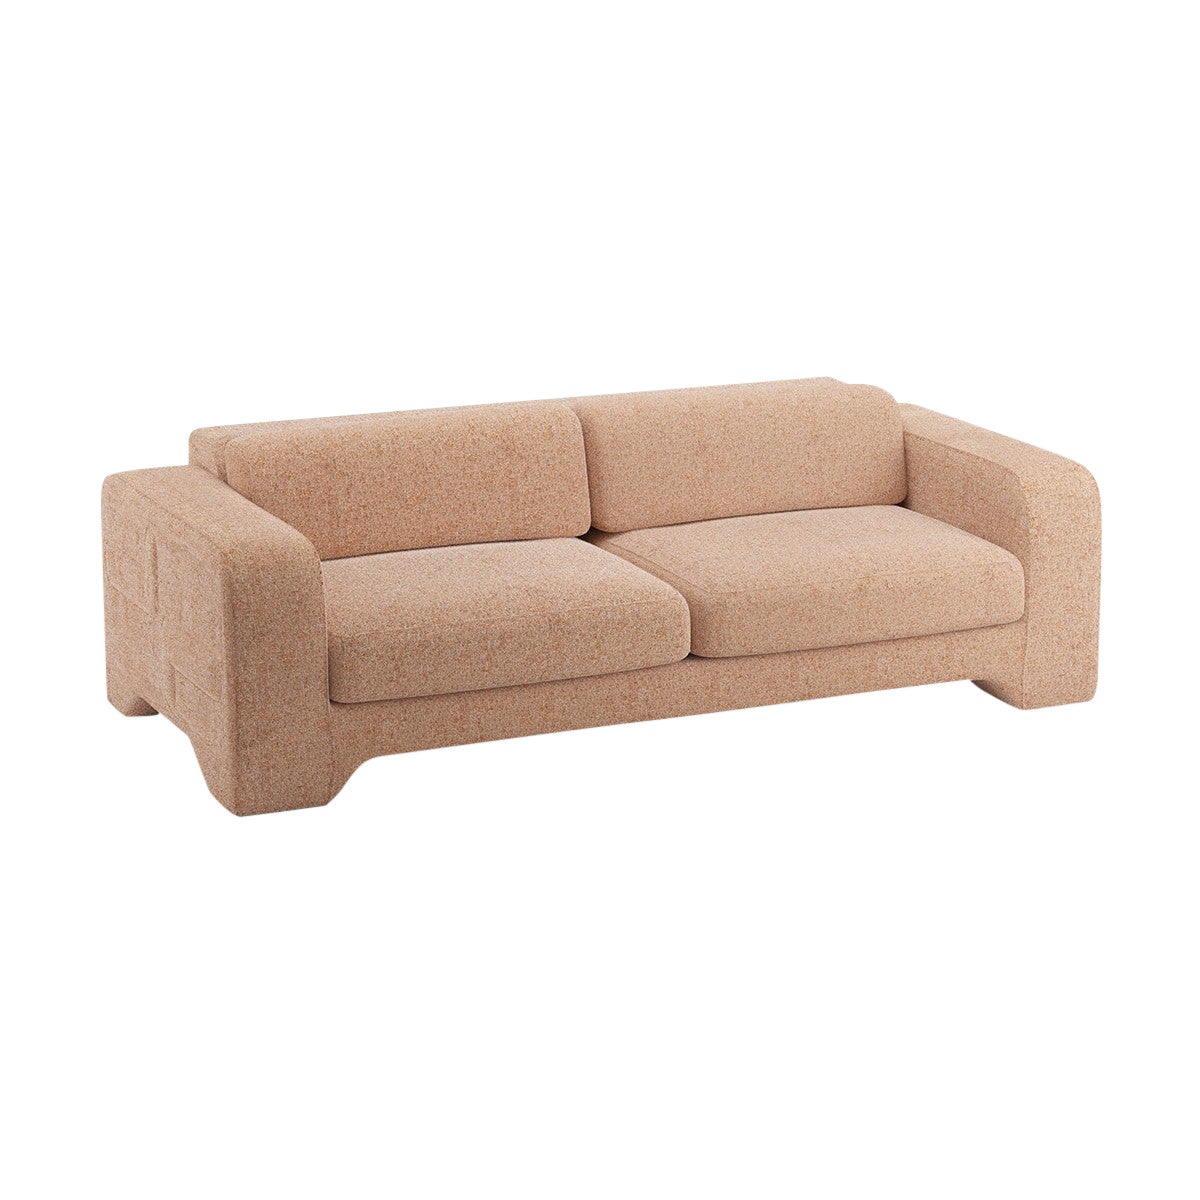 Popus Editions Giovanna 2.5 Seater Sofa in Terracotta London Linen Fabric For Sale